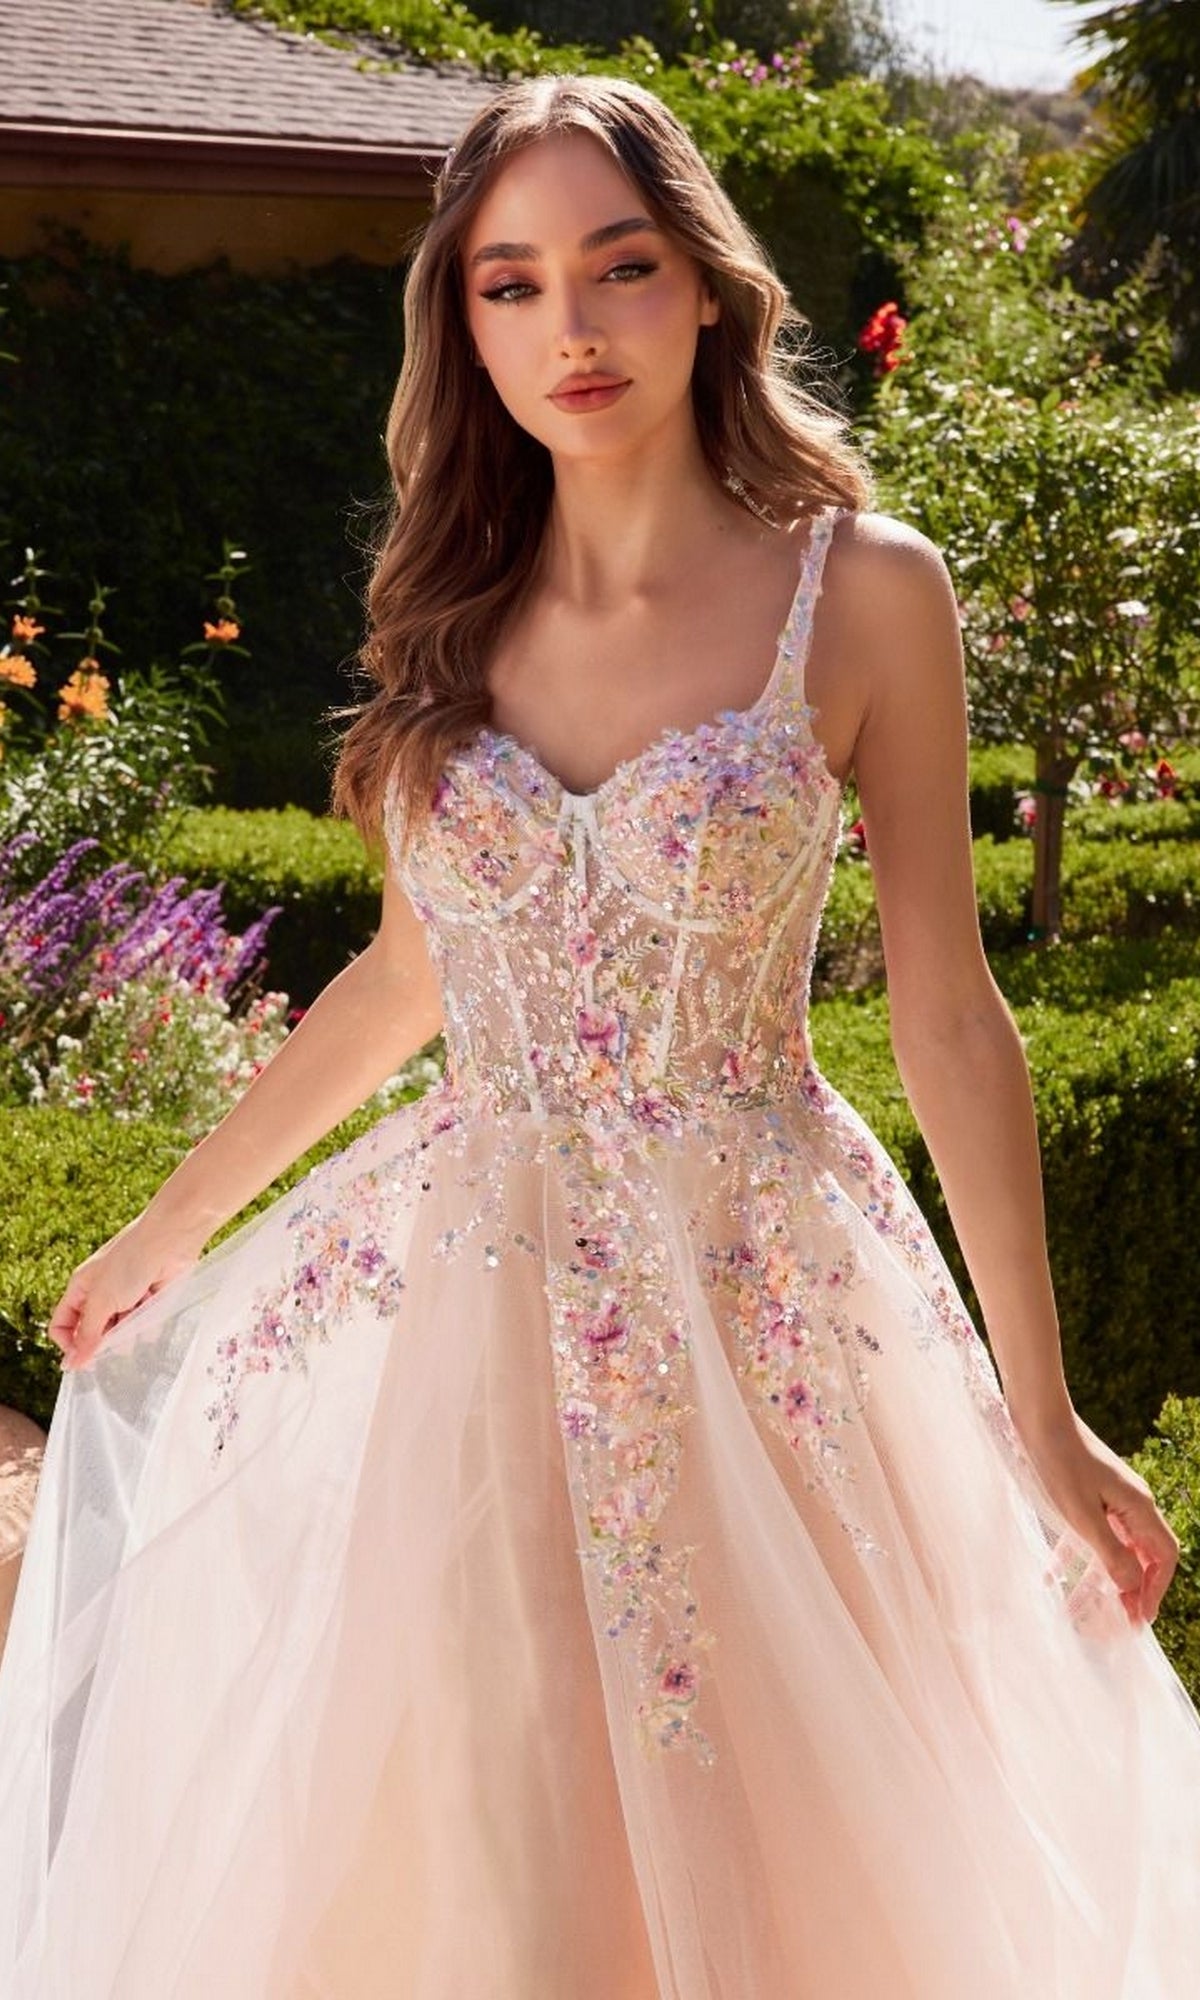 Off-White Long Prom Gown with Flowers - PromGirl